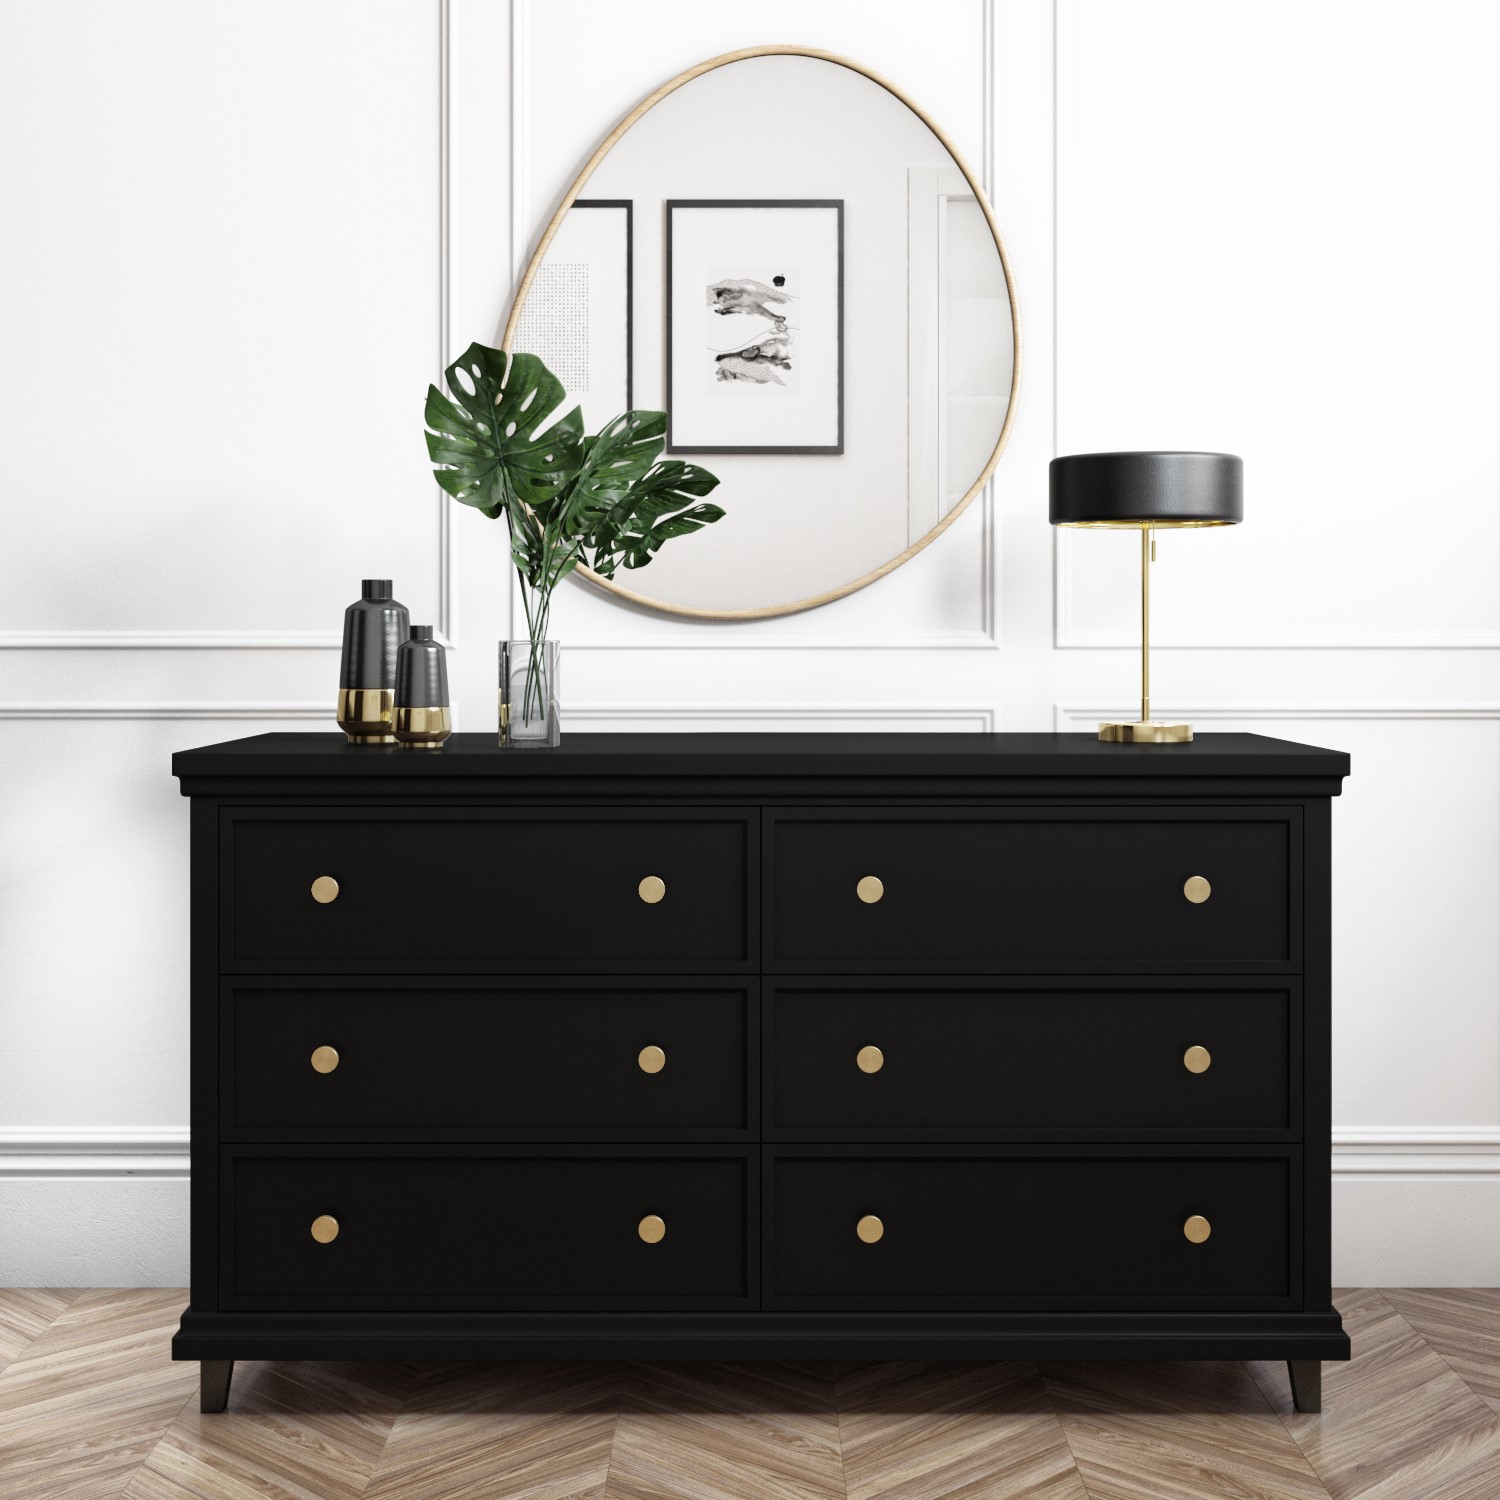 Photo of Wide black chest of 6 drawers - georgia